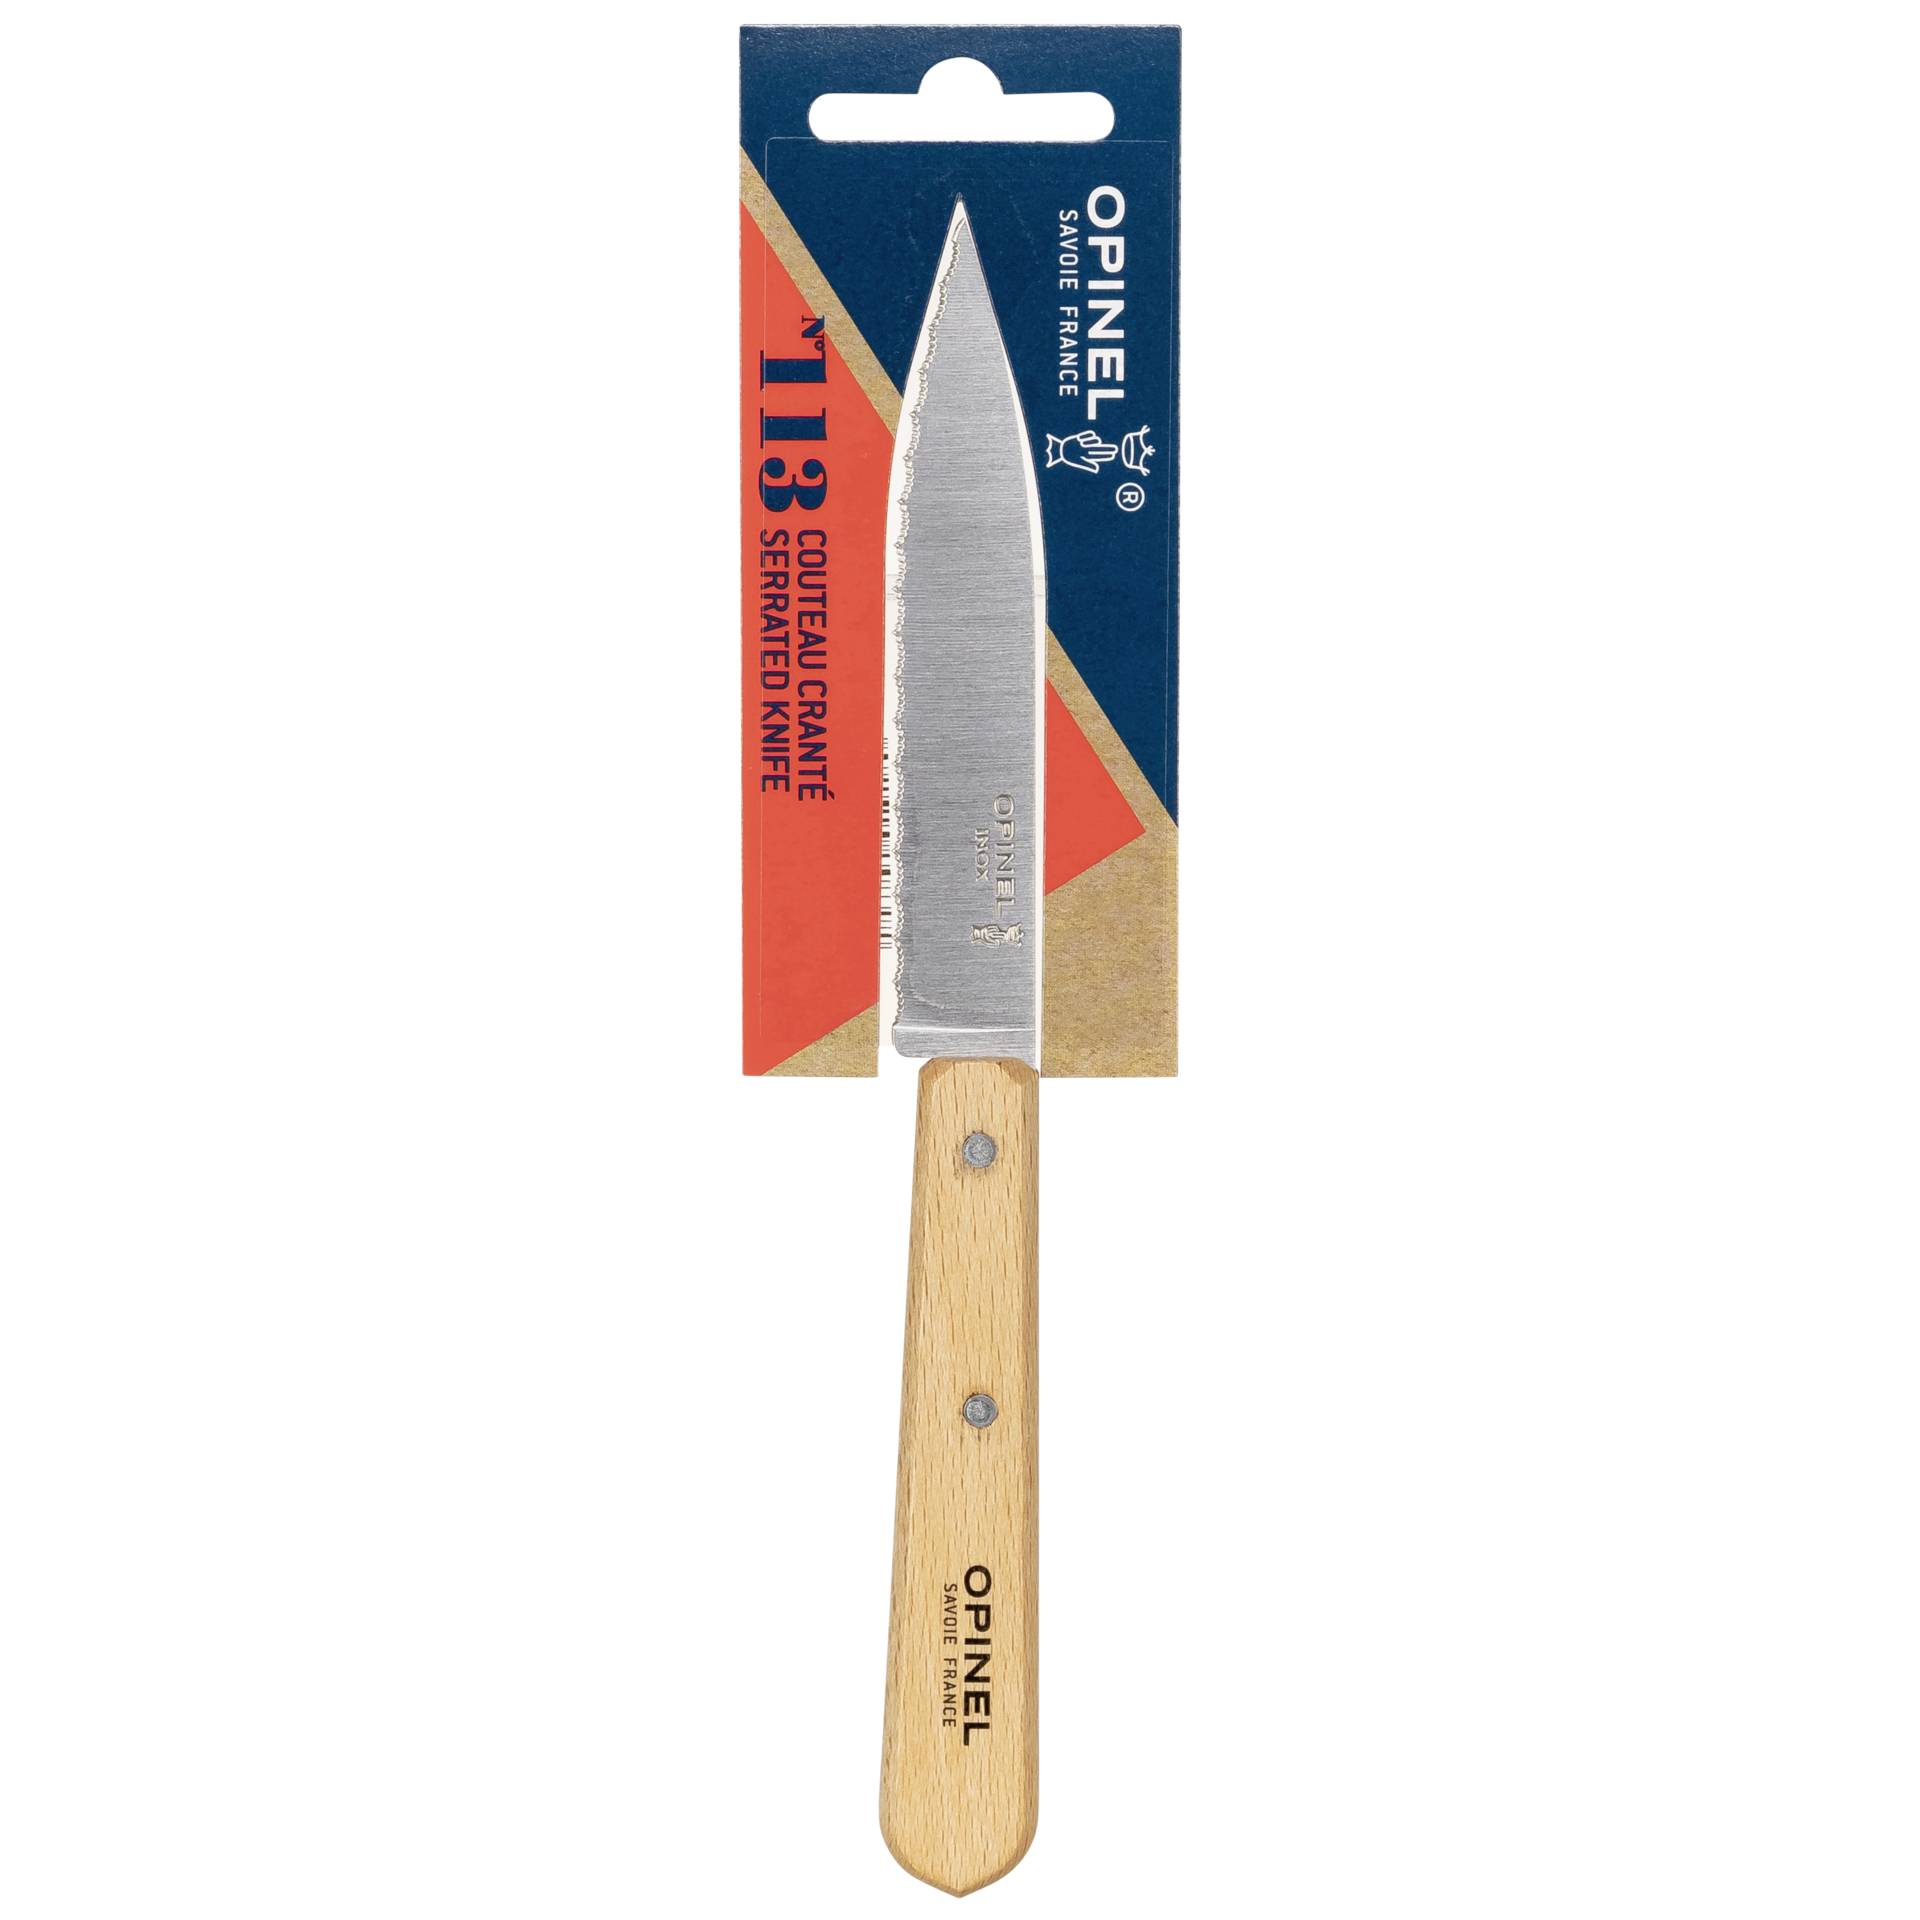 Opinel serrated knife No. 113 Natural